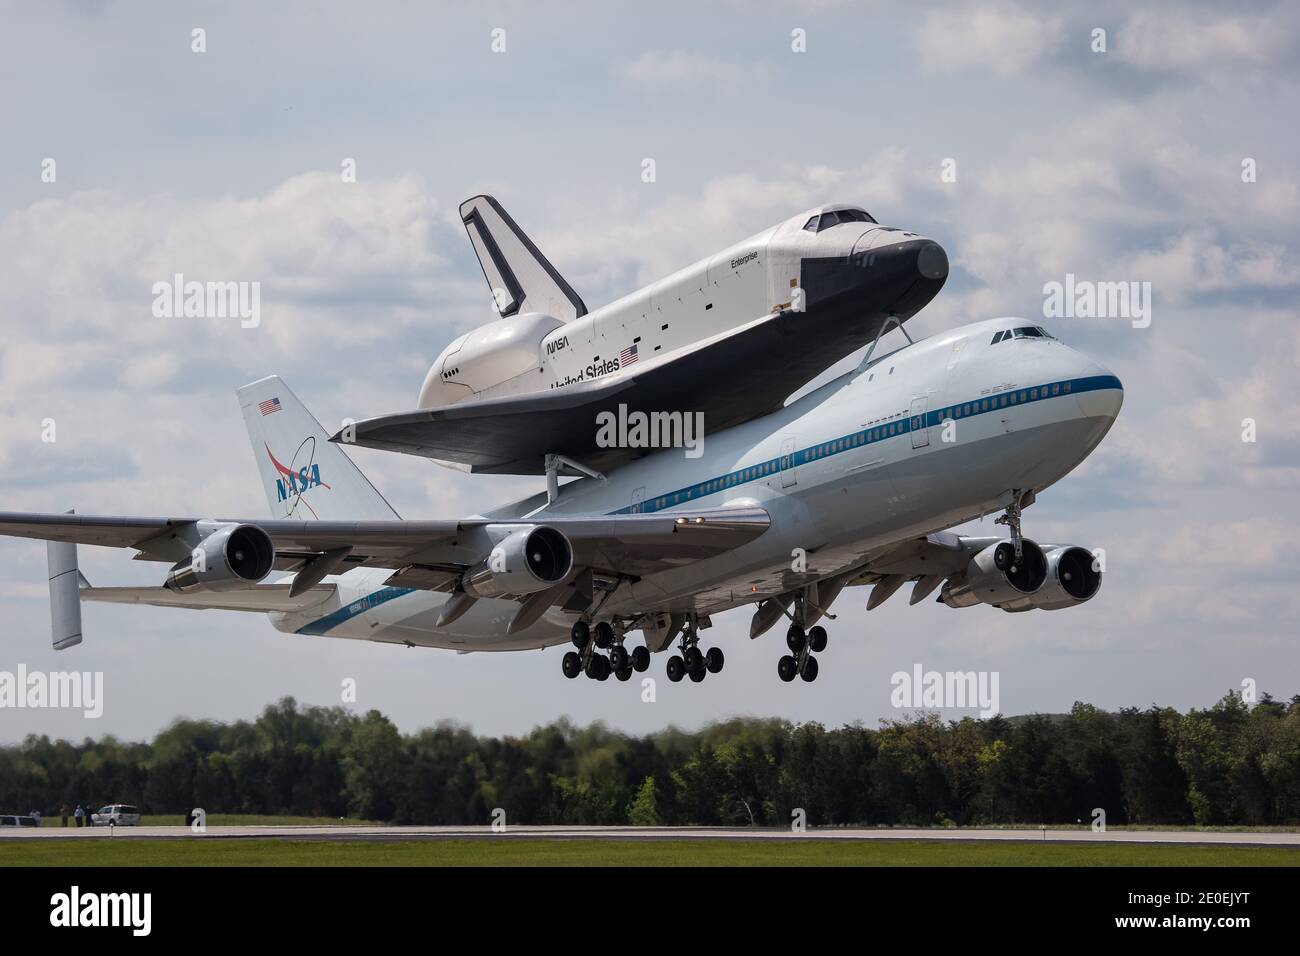 Space shuttle Enterprise, mounted atop a NASA 747 Shuttle Carrier Aircraft (SCA), is seen as it takes off for New York from Washington Dulles International Airport, Friday, April 27, 2012, in Sterling, VA. Enterprise was the first shuttle orbiter built for NASA performing test flights in the atmosphere and was incapable of spaceflight. Originally housed at the Smithsonian's Steven F. Udvar-Hazy Center, Enterprise will be demated from the SCA and placed on a barge that will eventually be moved by tugboat up the Hudson River to the Intrepid Sea, Air & Space Museum in June. Photo by Scott Andrews Stock Photo